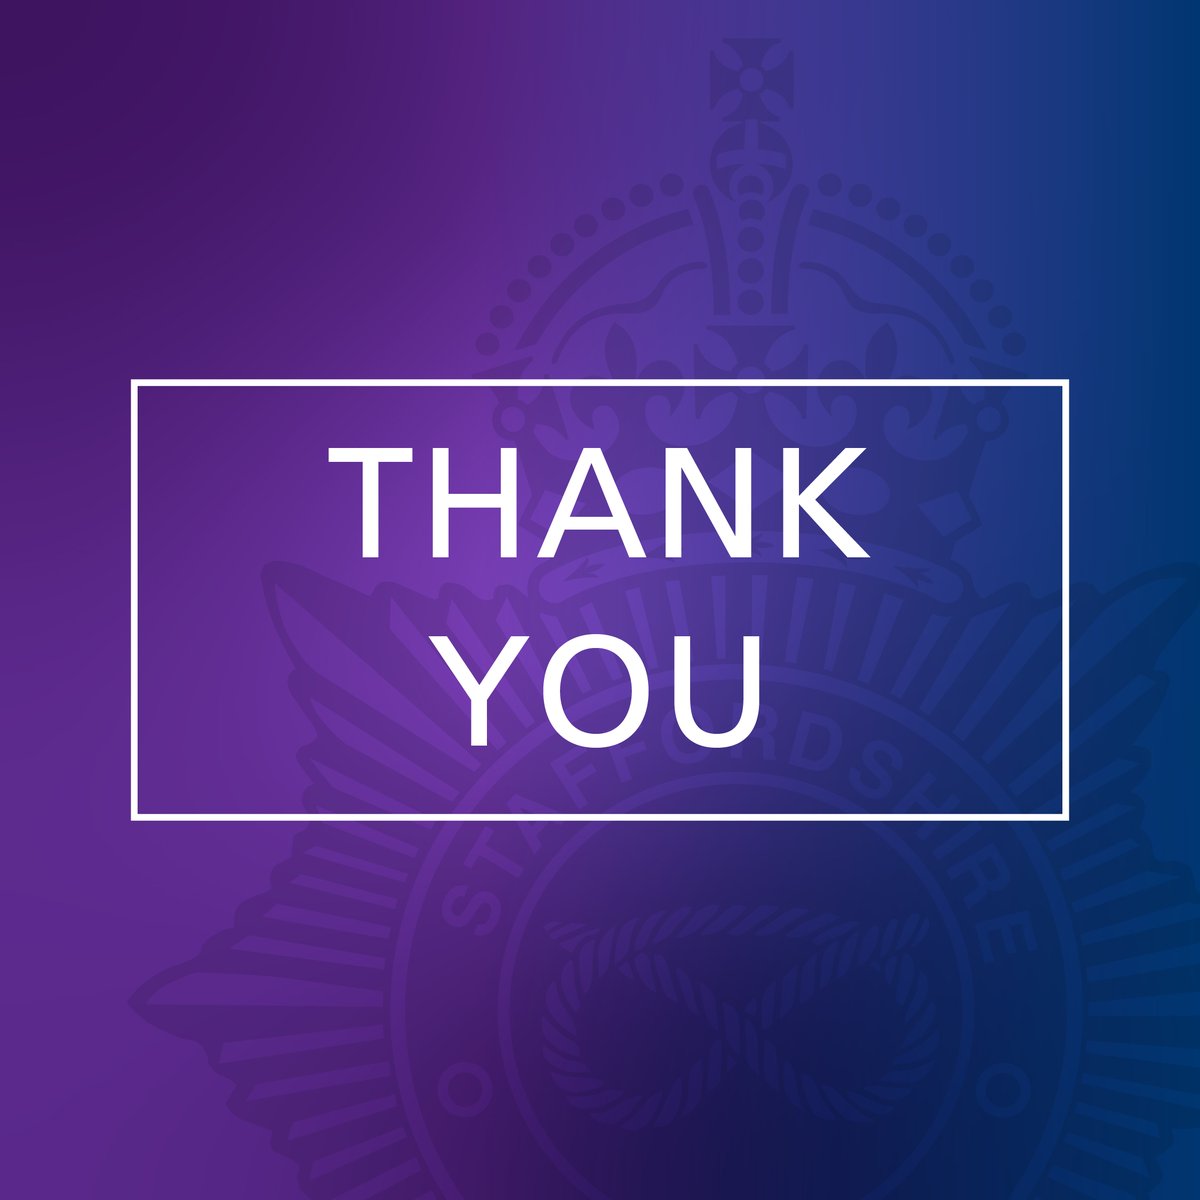 Thank you for sharing our earlier appeal for missing Szelim from Burton-on-Trent. They have now been found.